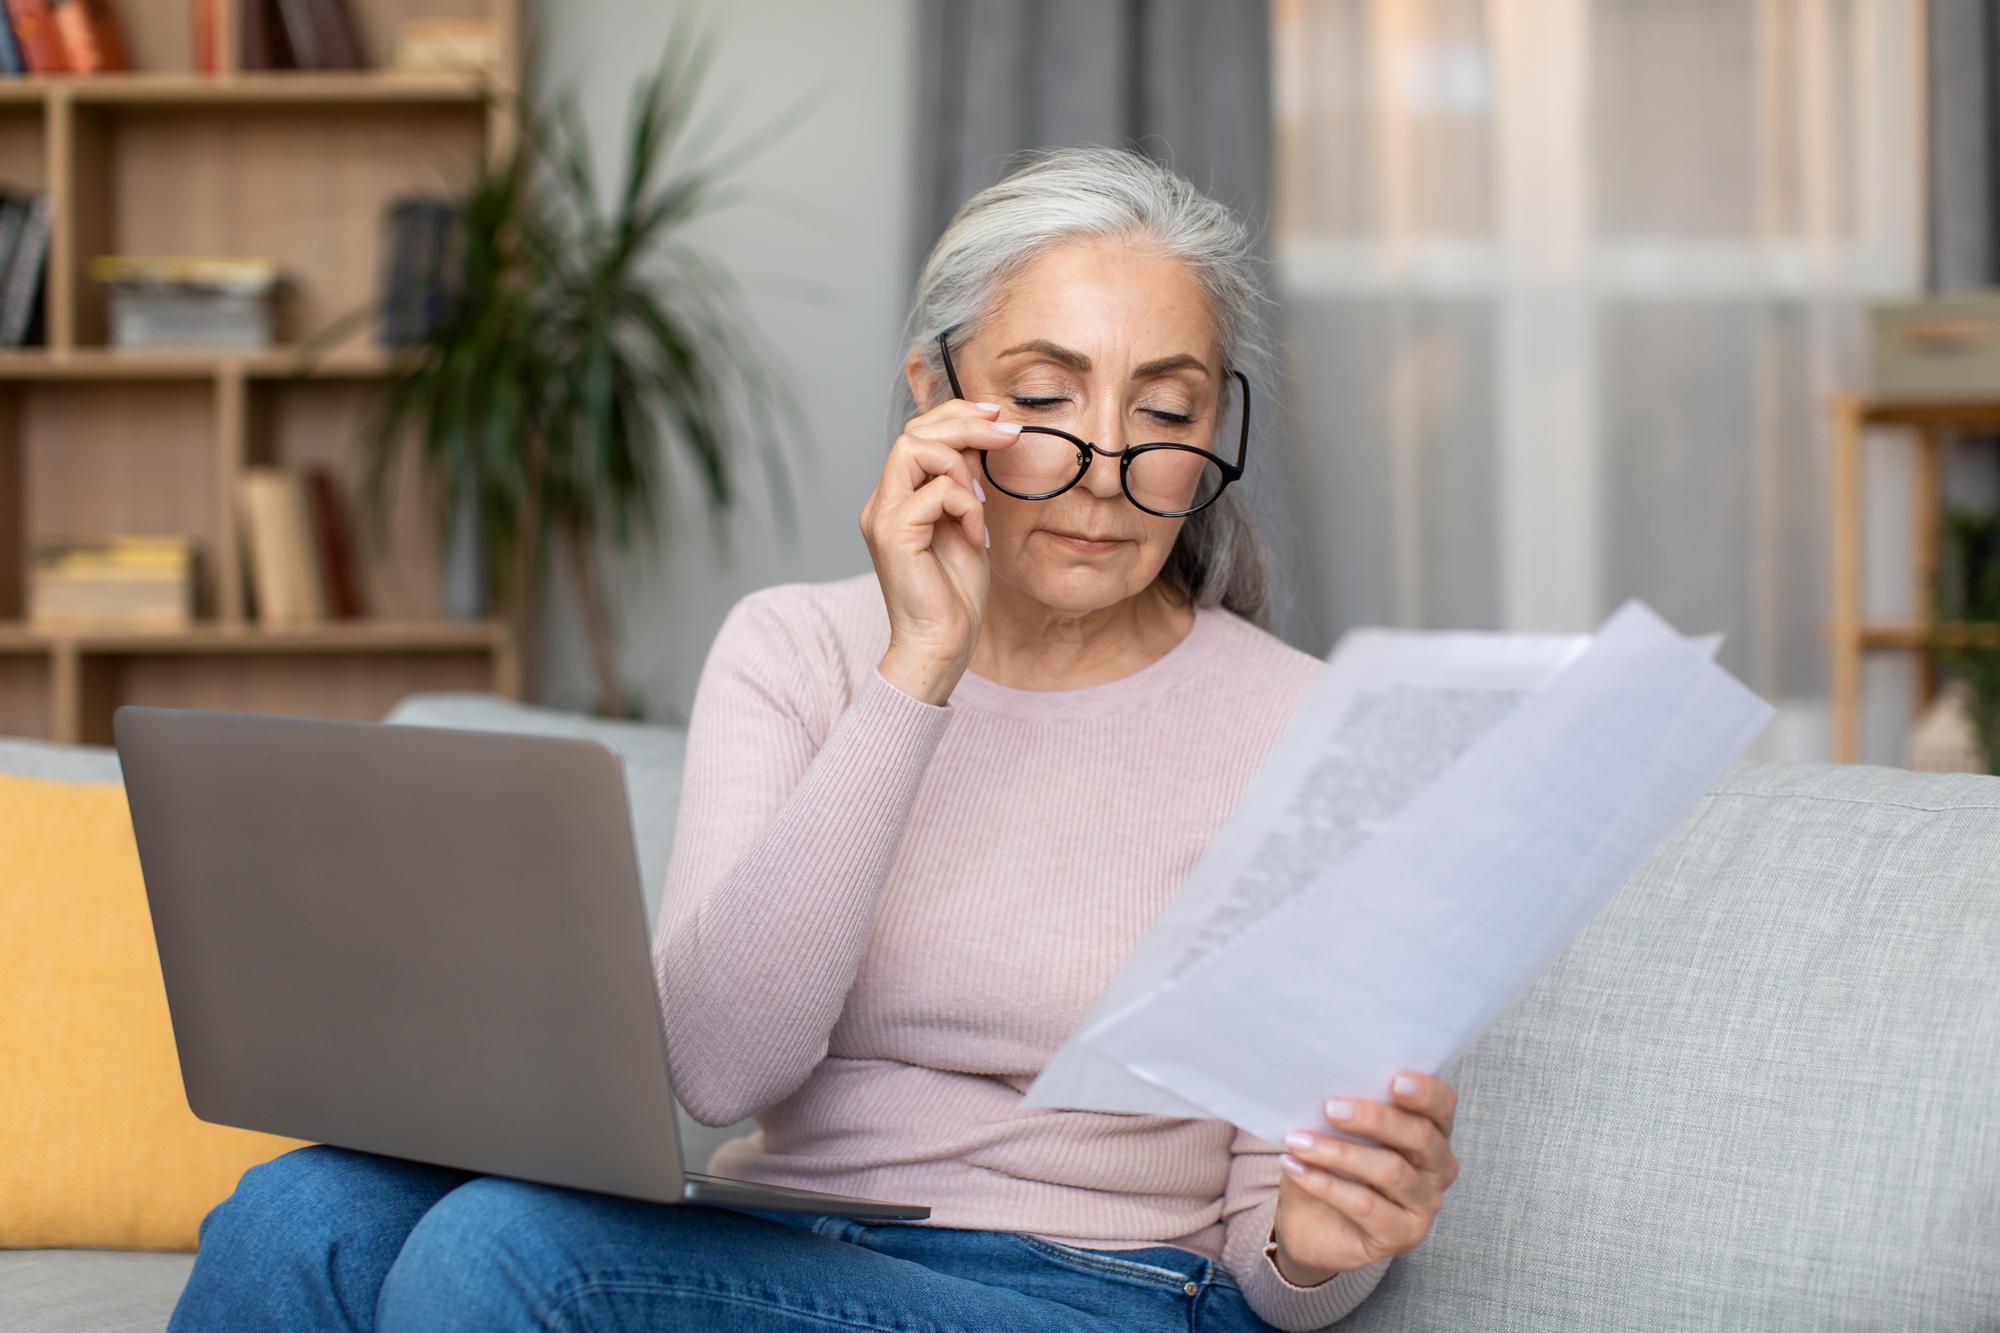 10 Tax Breaks For Seniors You May Not Be Aware Of